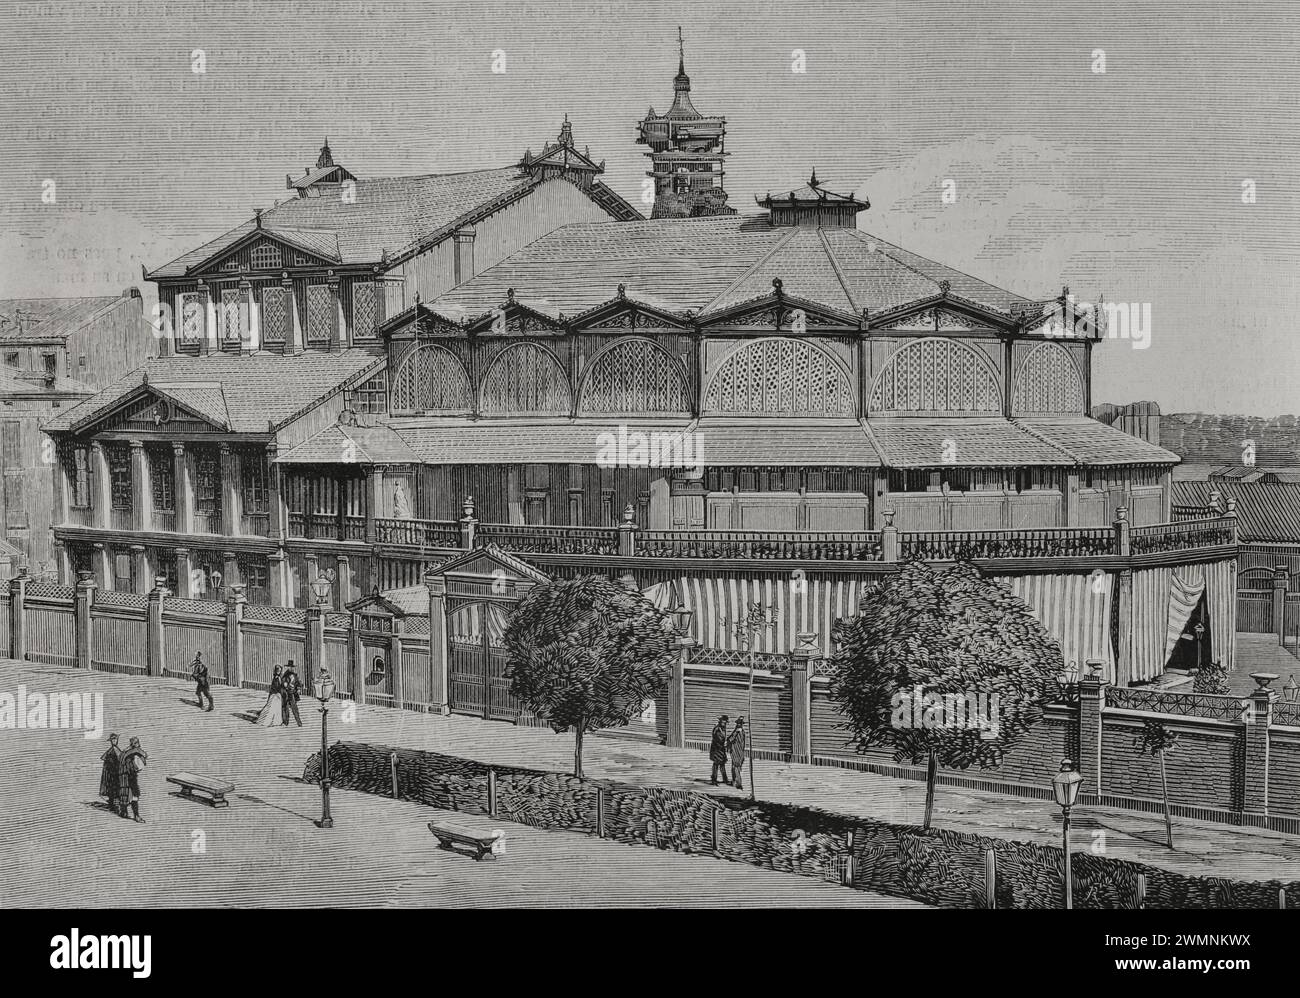 History of Spain. Aragon. Saragossa. Exterior view of the Pignatelli Theatre, built in Independencia Street under direction of the architect Félix Navarro Pérez (1849-1911). It was inaugurated on 14 August 1878. Demolished in November 1915. Engraving. La Ilustración Española y Americana (The Spanish and American Illustration), 1878. Stock Photo